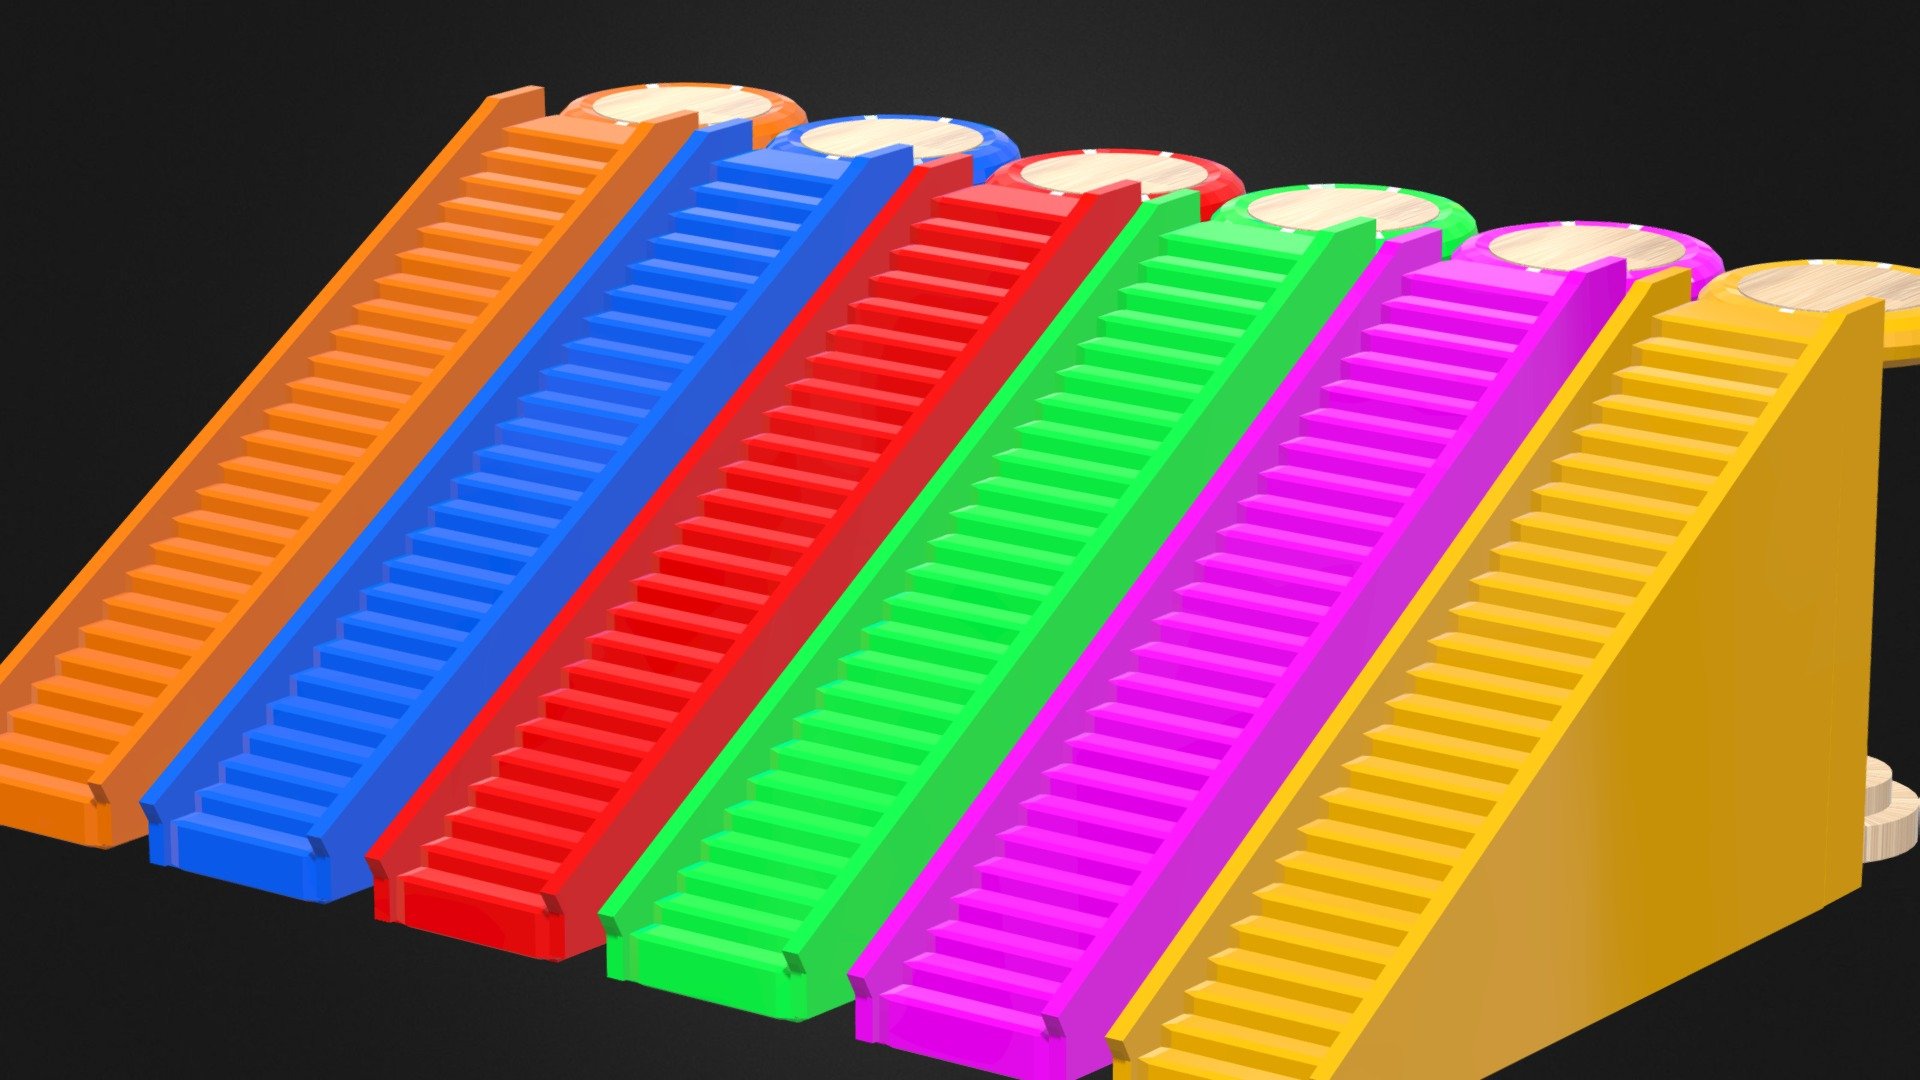 contact for purchase +923149343181 WhatsApp - New Colorful Stairs - 3D model by saqlain (@mirzabaig4445) 3d model